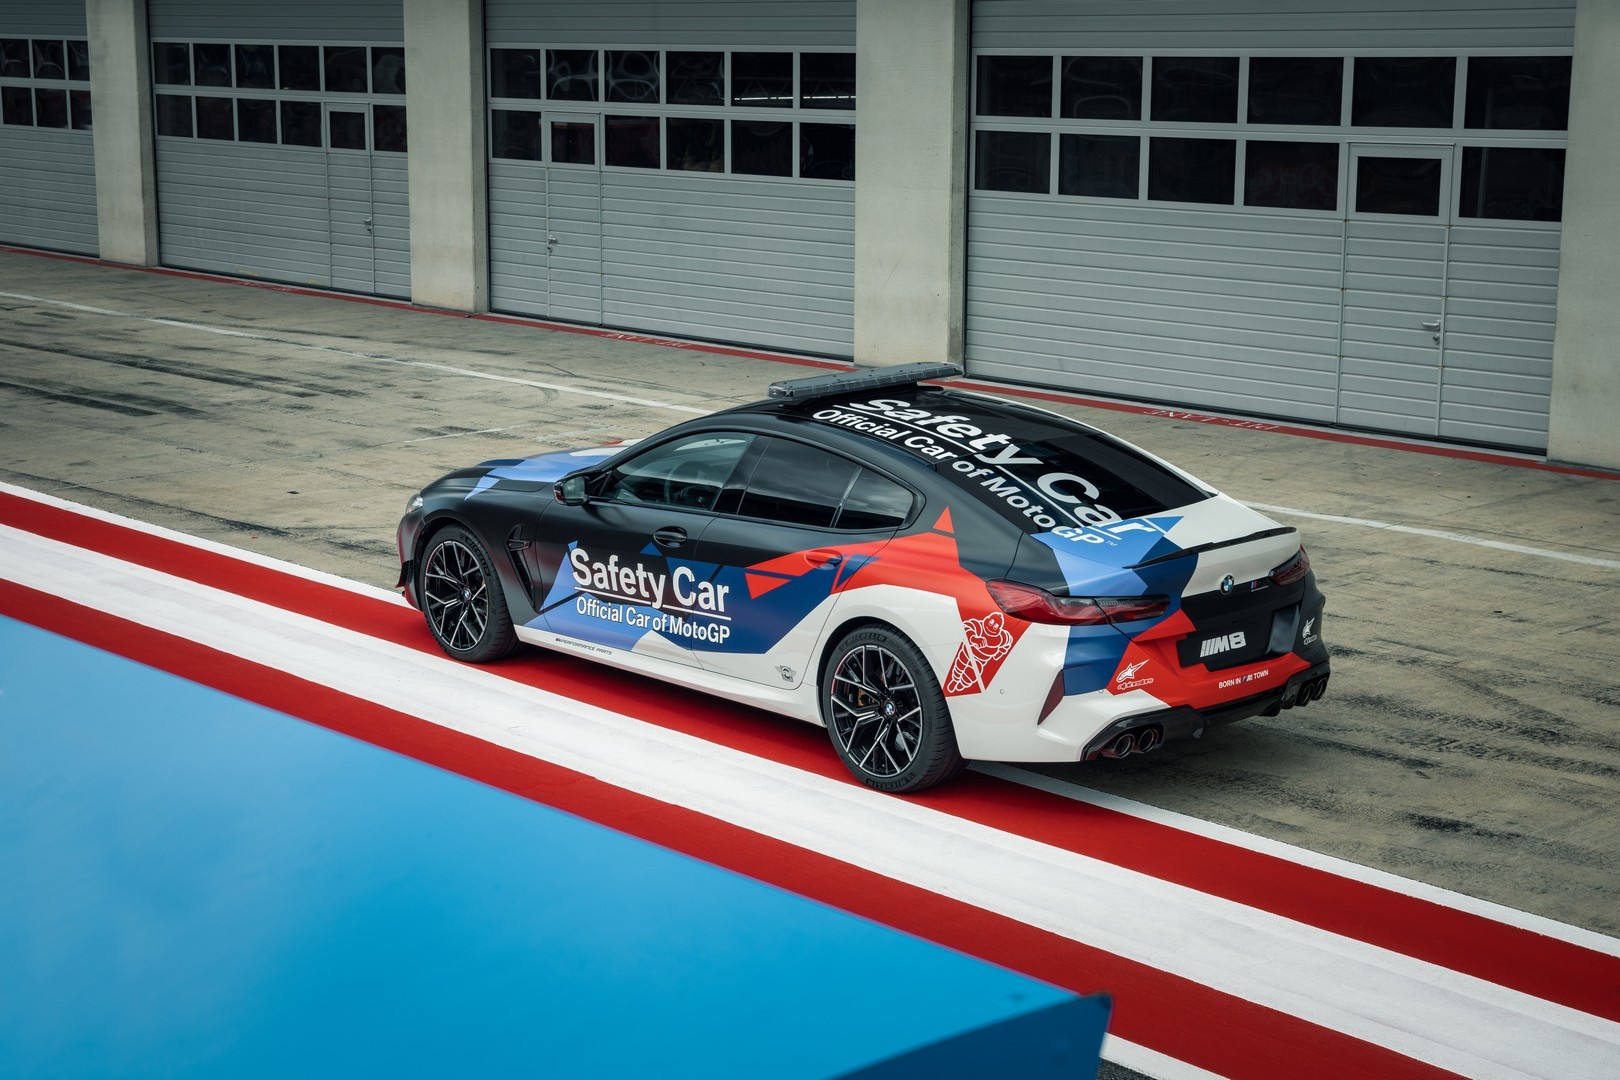 2019 - [BMW] Série 8 Gran Coupé [G16] - Page 7 Bmw-surprisingly-turned-the-new-m8-gran-coupe-into-a-safety-car-for-motogp_4